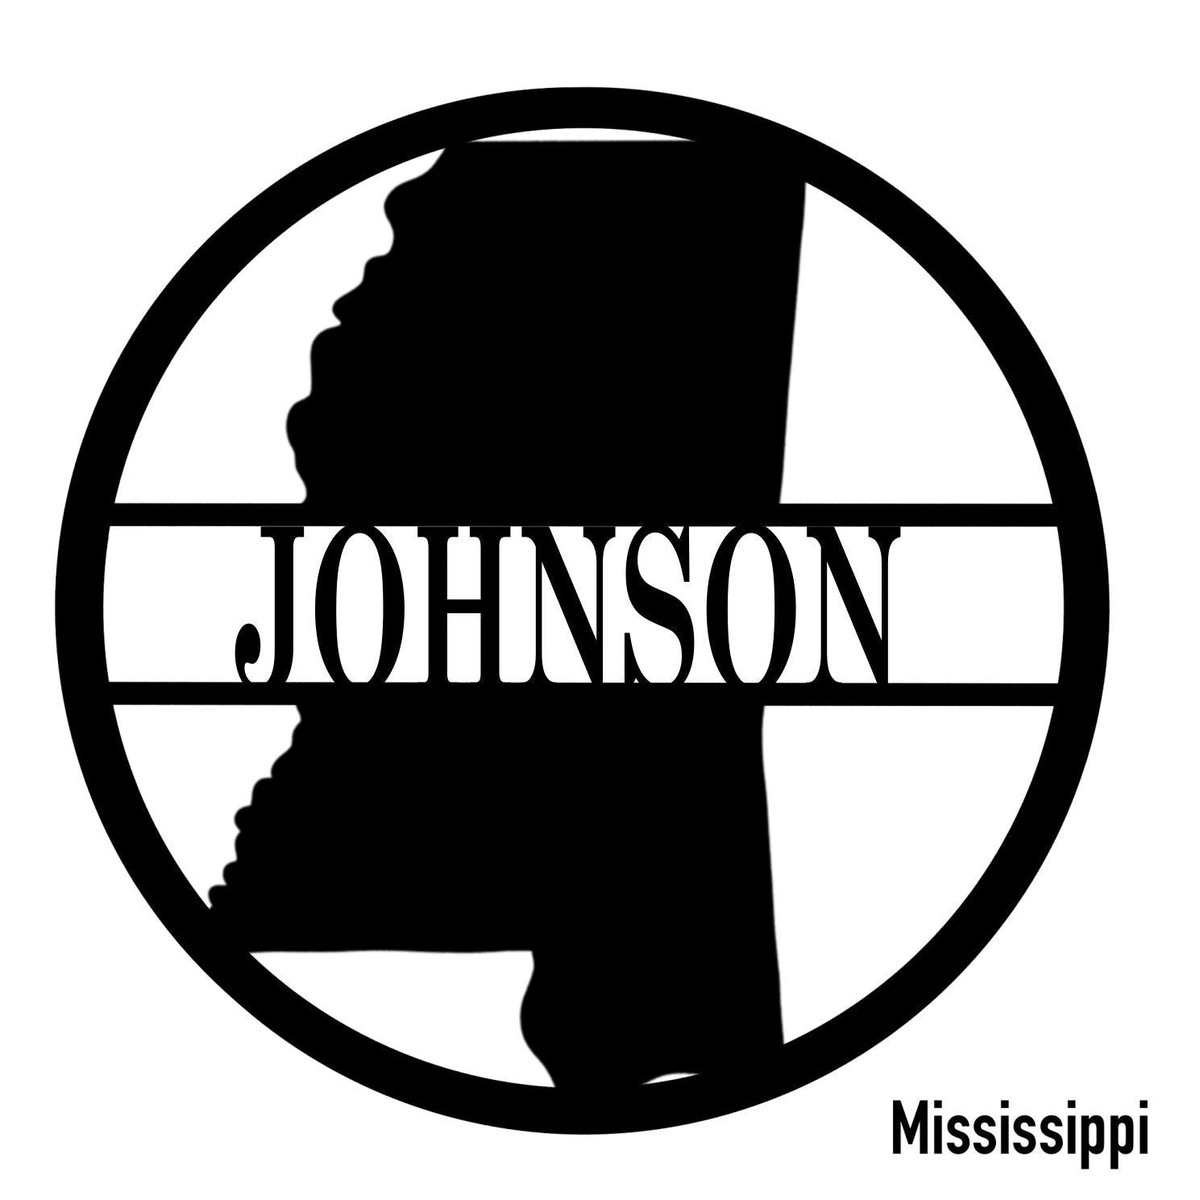 Mississippi State Monogram Cut Metal Sign Wall Decor Metal Sign Metal Art | Aeticon Print Cut Metal Sign 8x8in